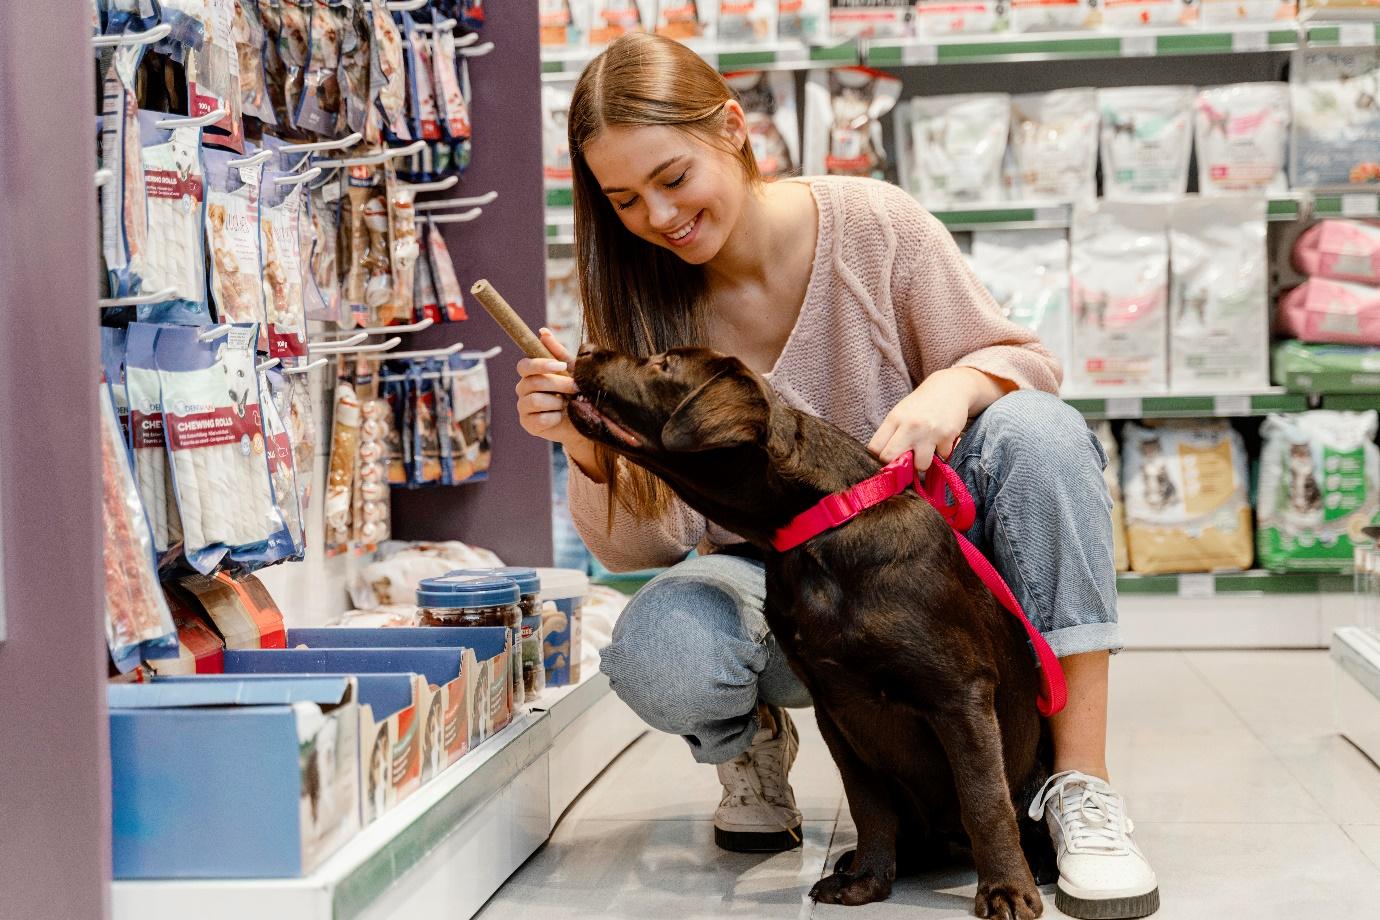 A woman crouches next to her dog in a pet store. The dog really wants the treat the woman has in her hand.